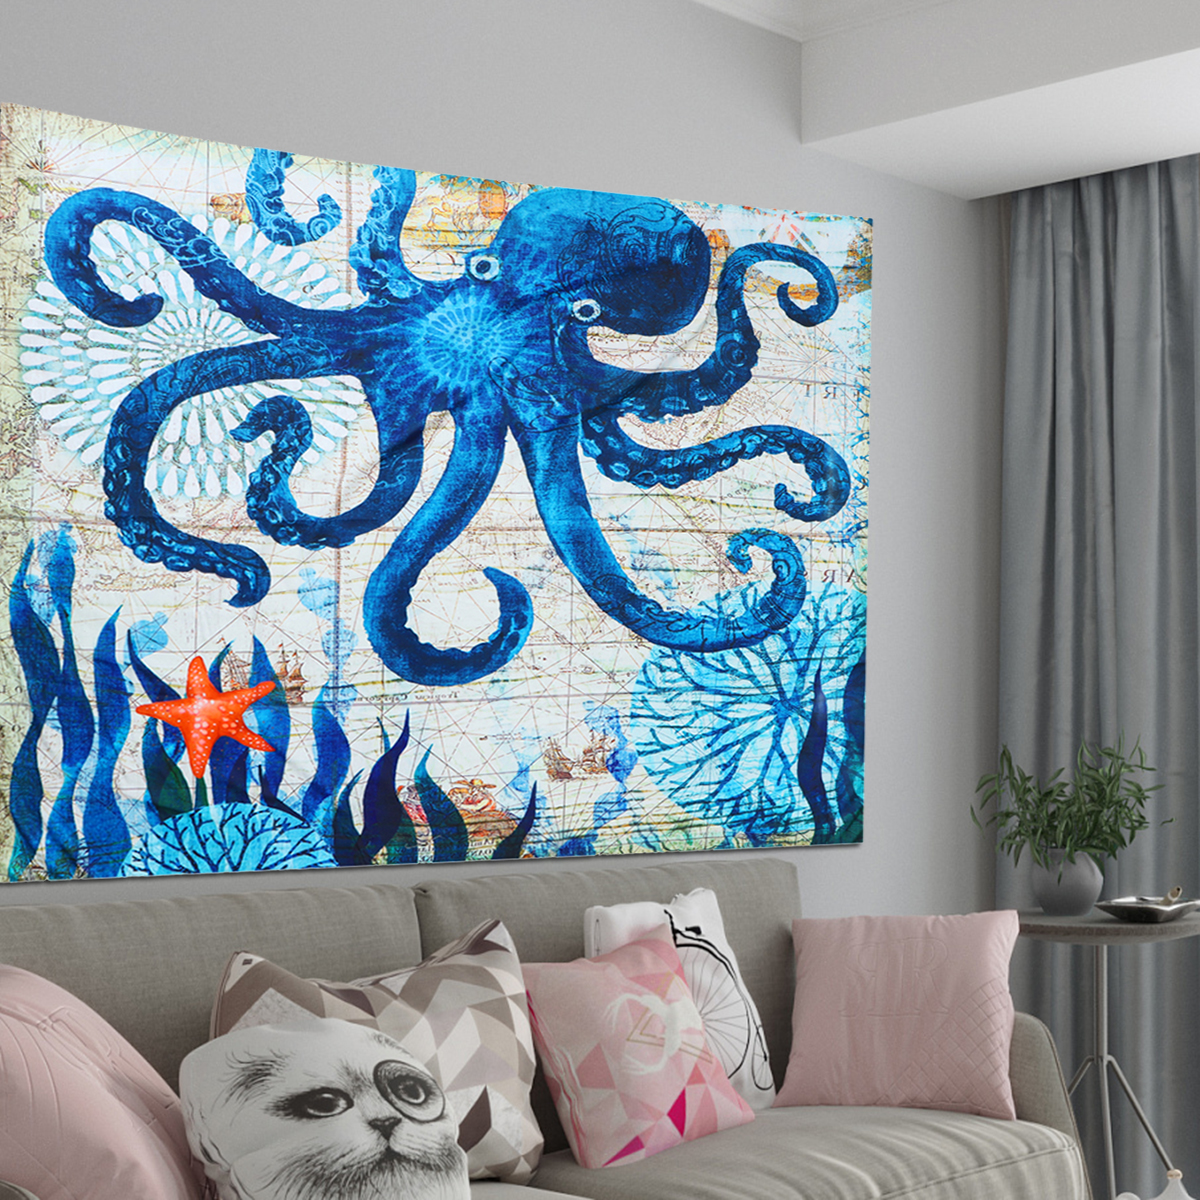 

Large Octopus High Density Tapestry Wall Hanging Mandala Hippie Bedspread Throw Painting